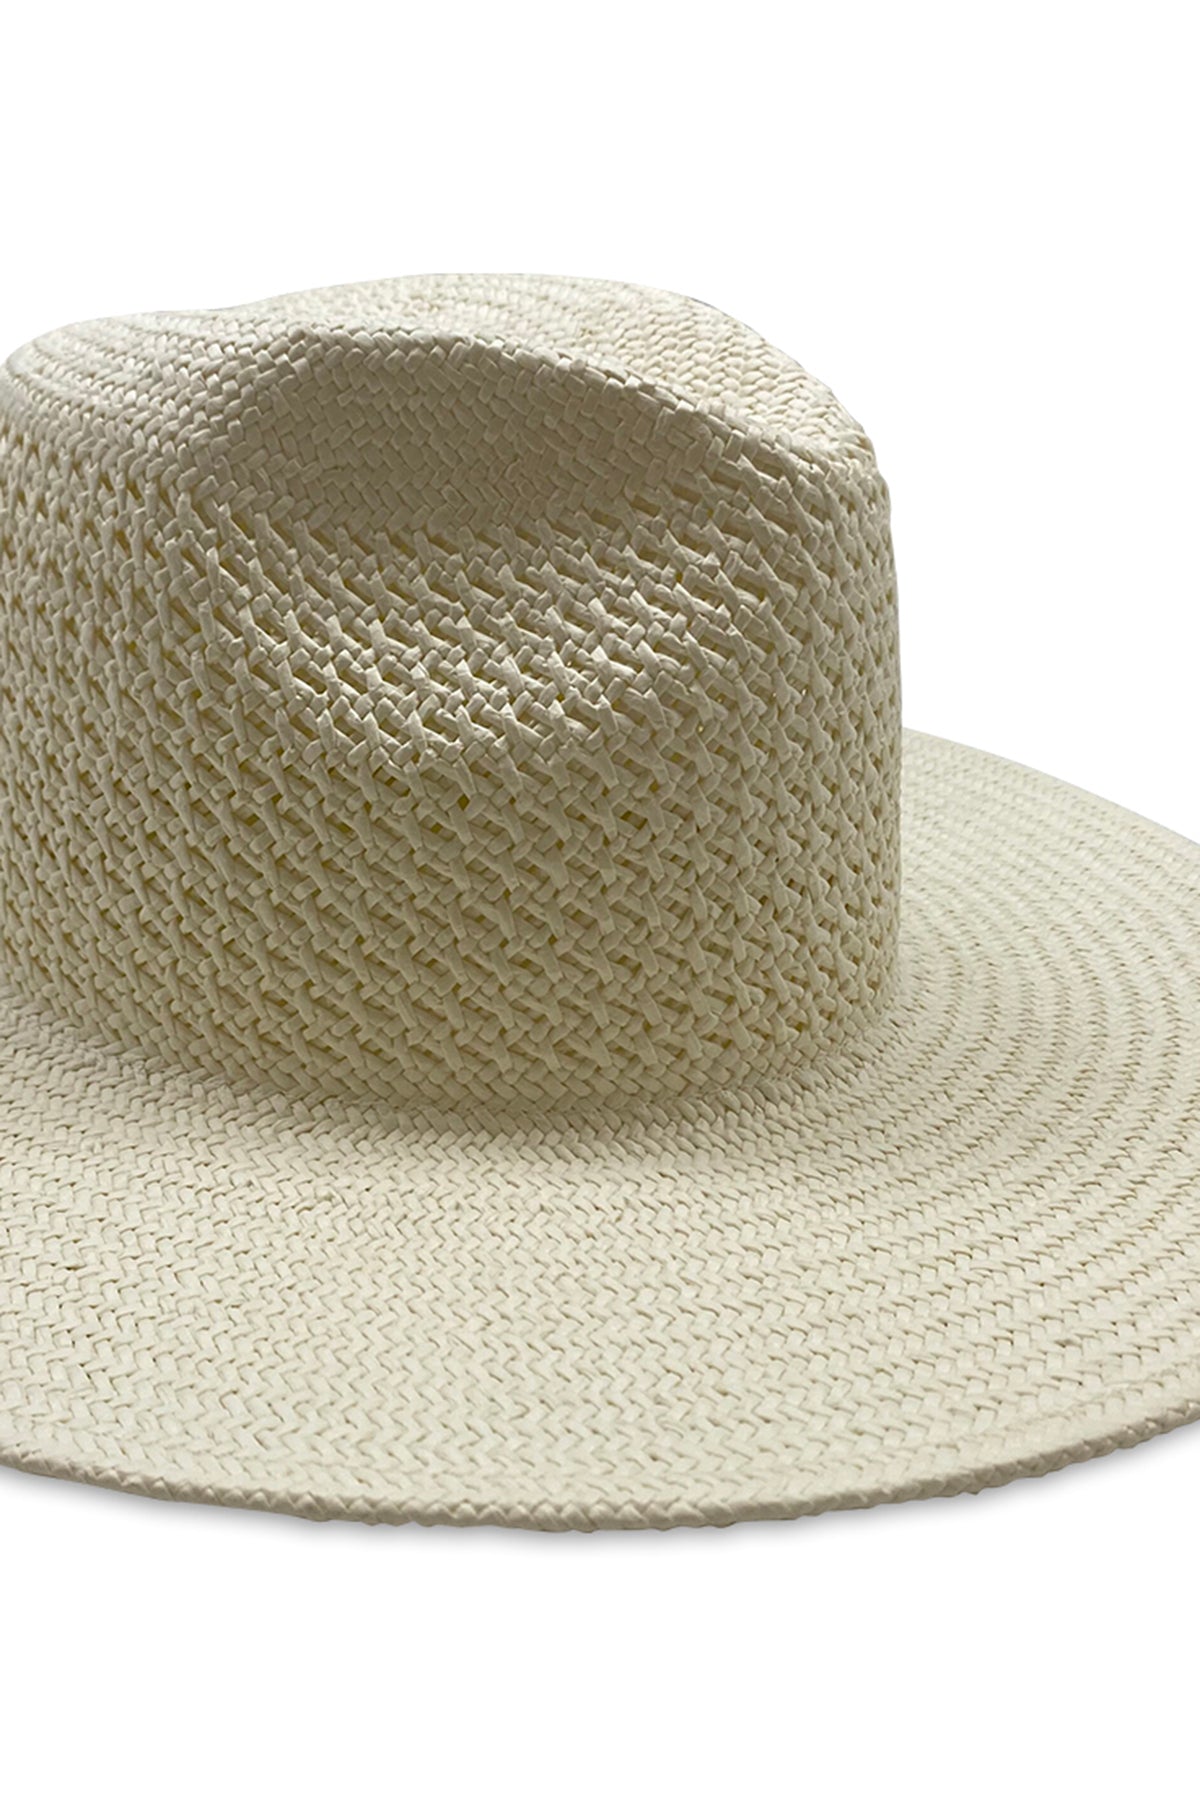 Vented Luxe Packable Hat Bleach Detail-24285360029889